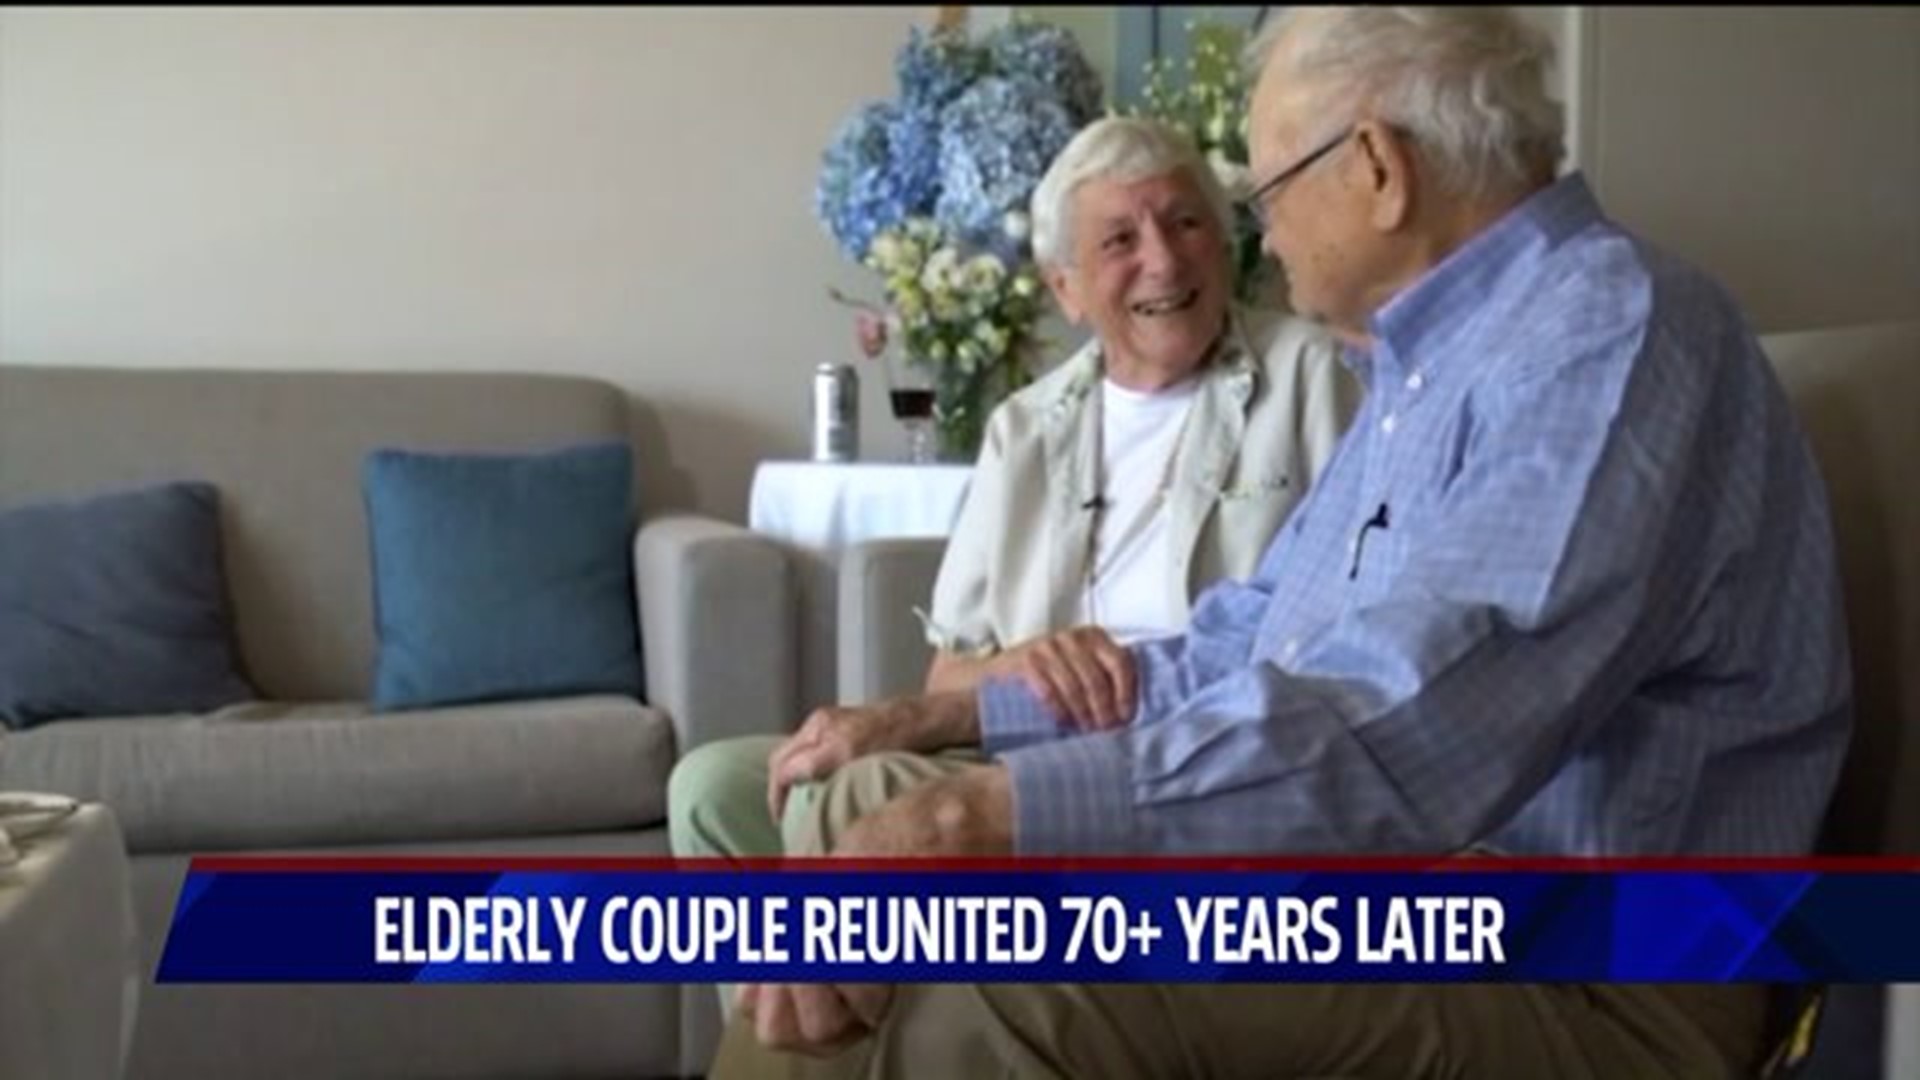 A reunion 70 years in the making